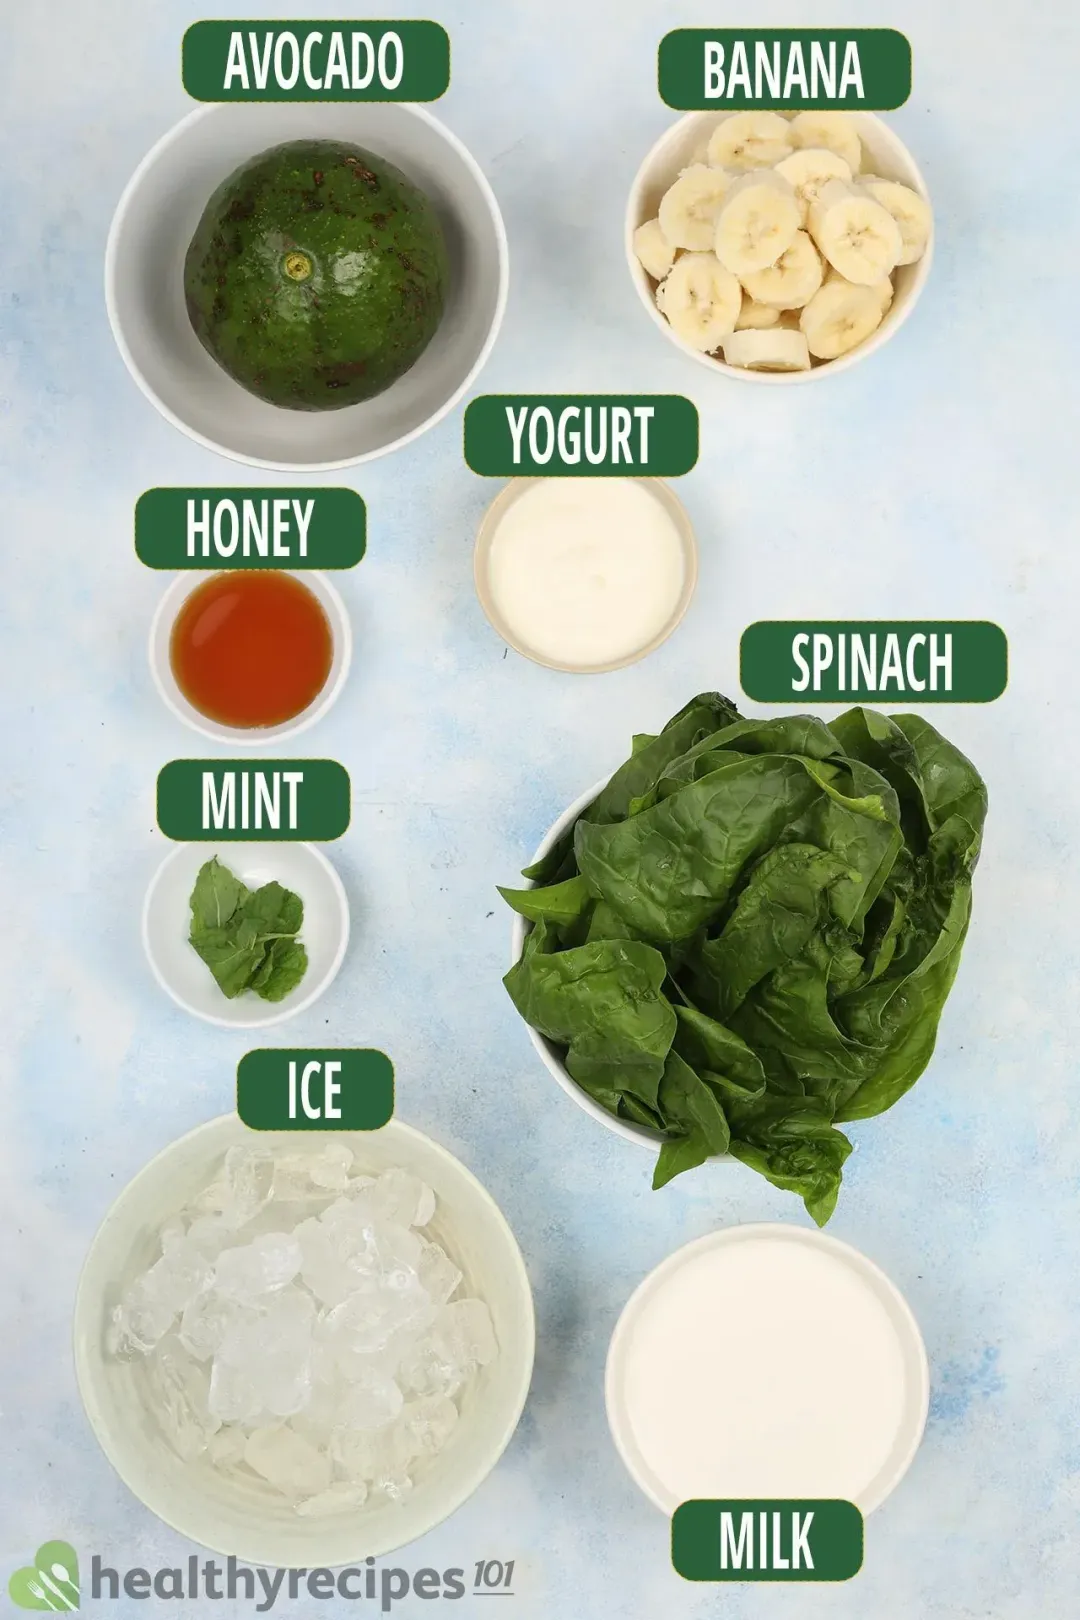 Ingredients for Avocado Spinach Smoothie